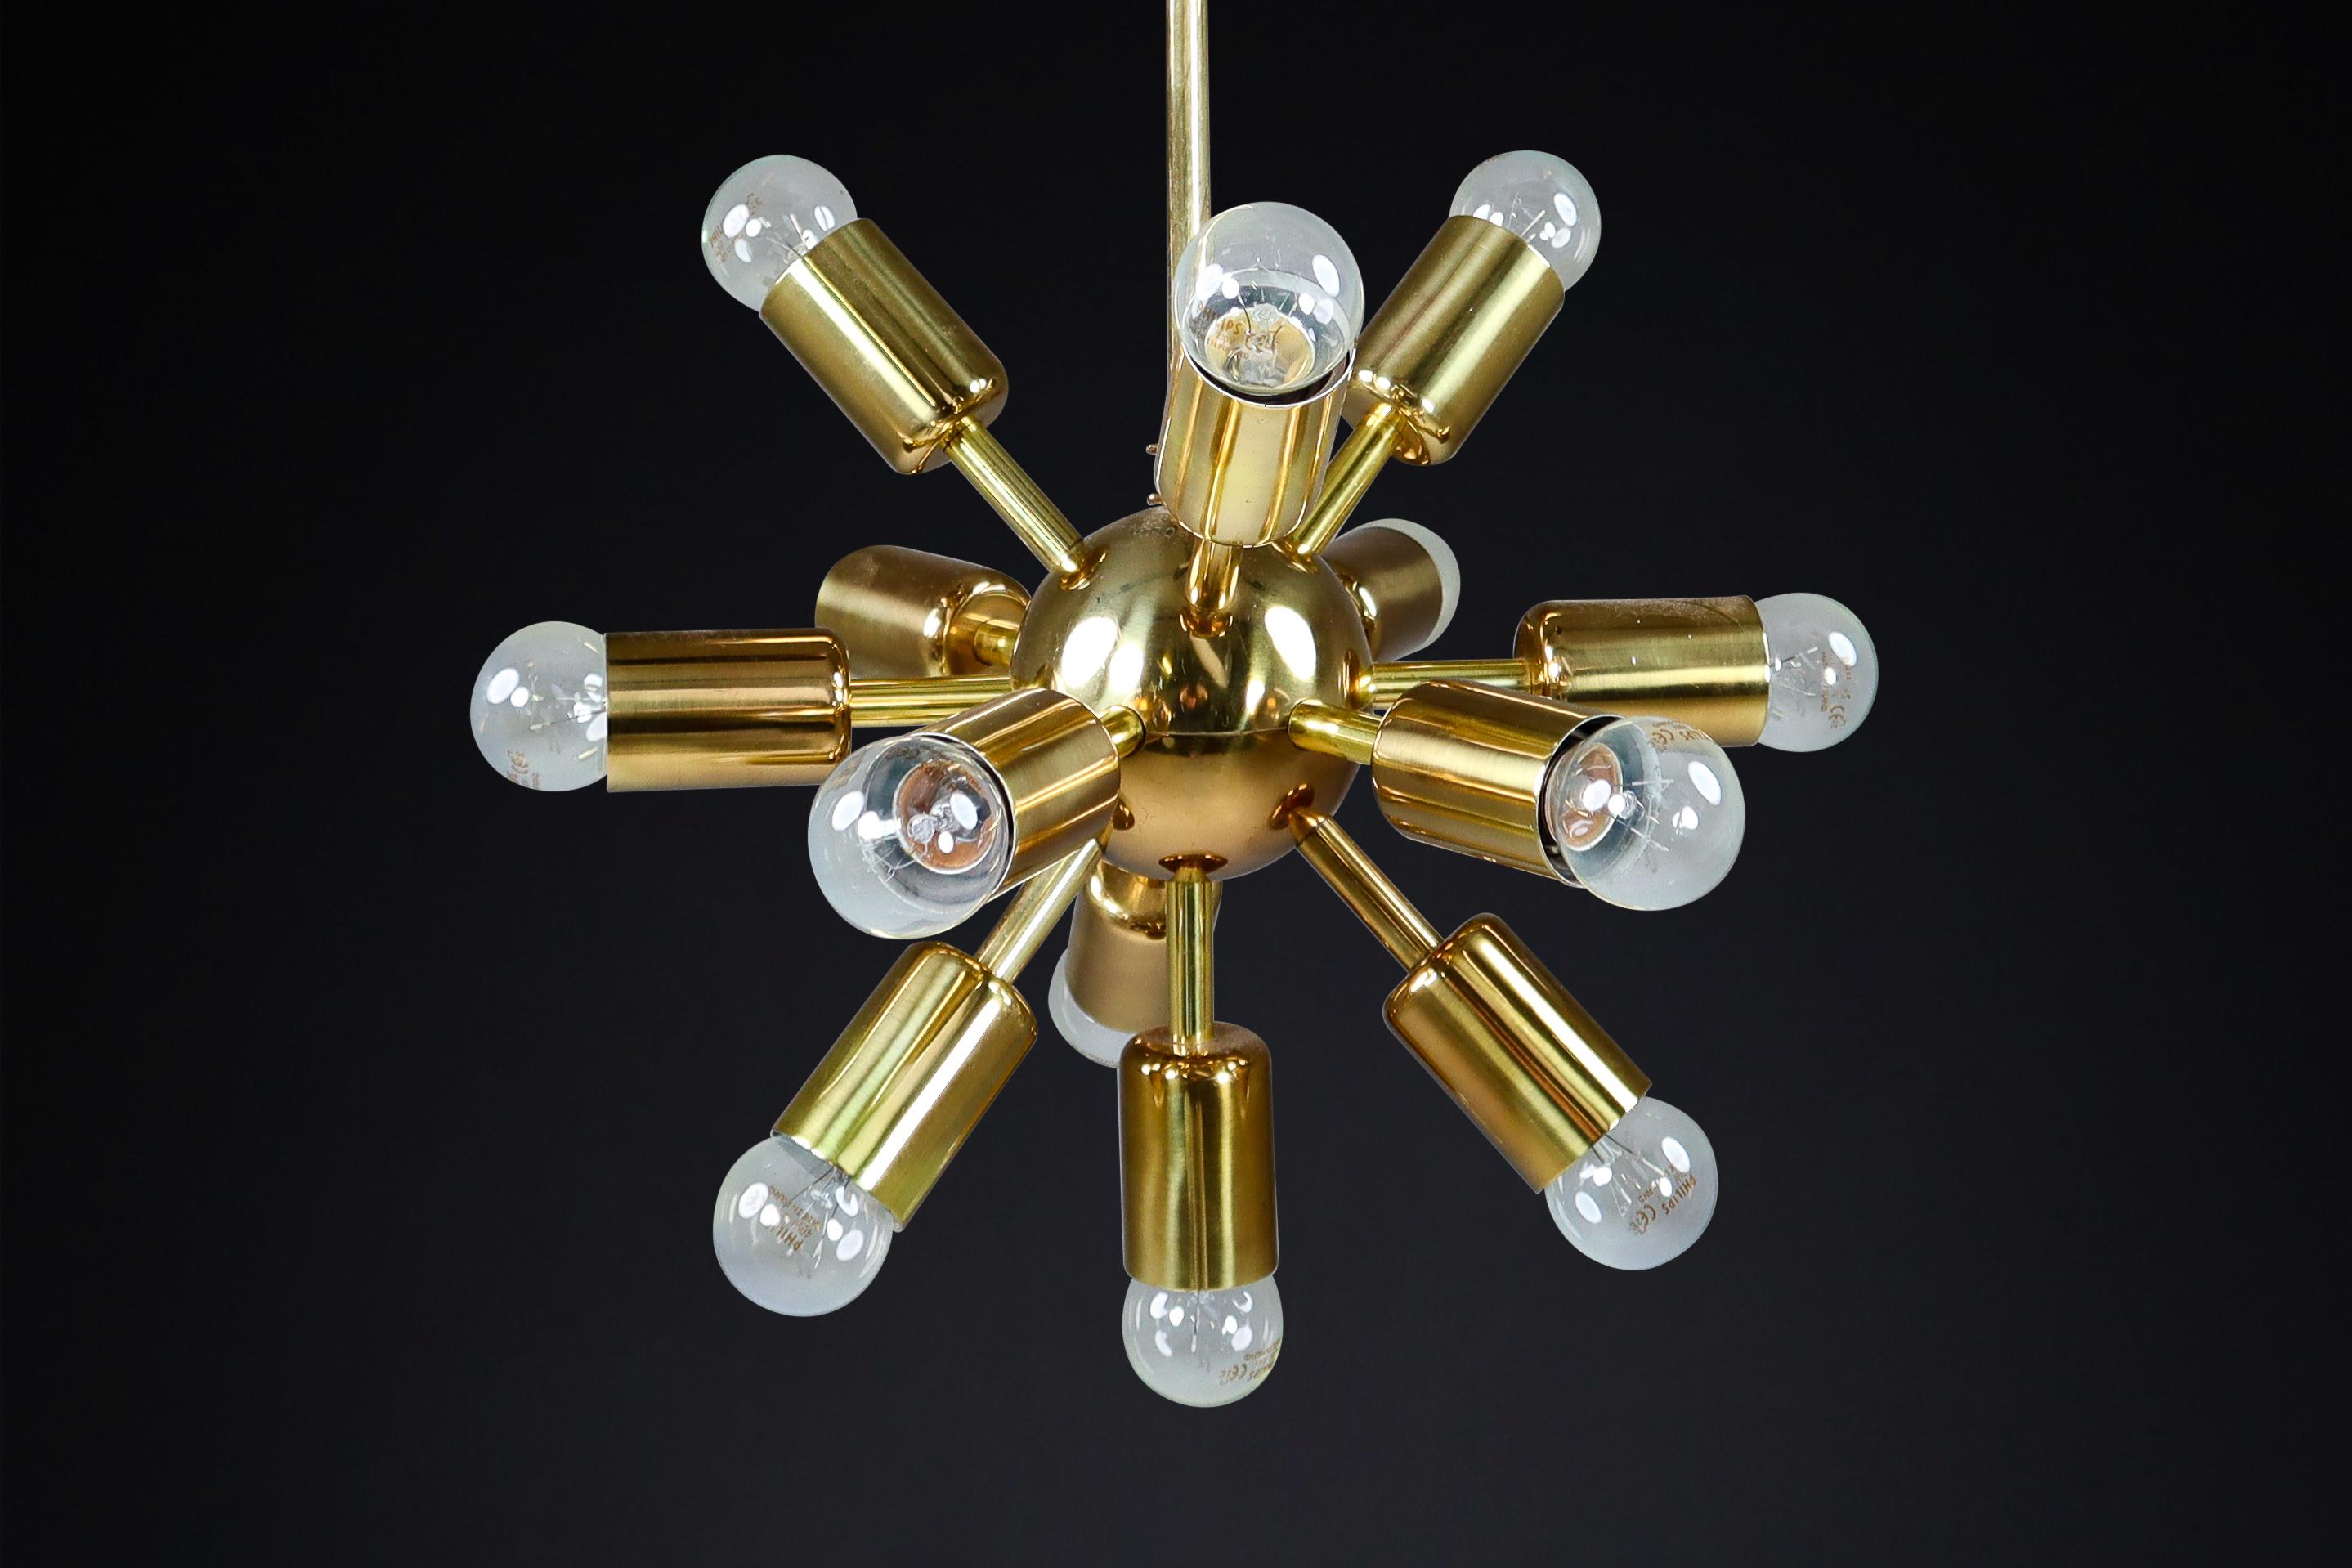 Mid-Century Brass Sputnik Chandeliers by Drupol, Praque 1960s

These brass Sputnik chandeliers with twelve lights are a must-have for any interior looking to add a touch of luxury. They are compatible with various standards, including LED, and